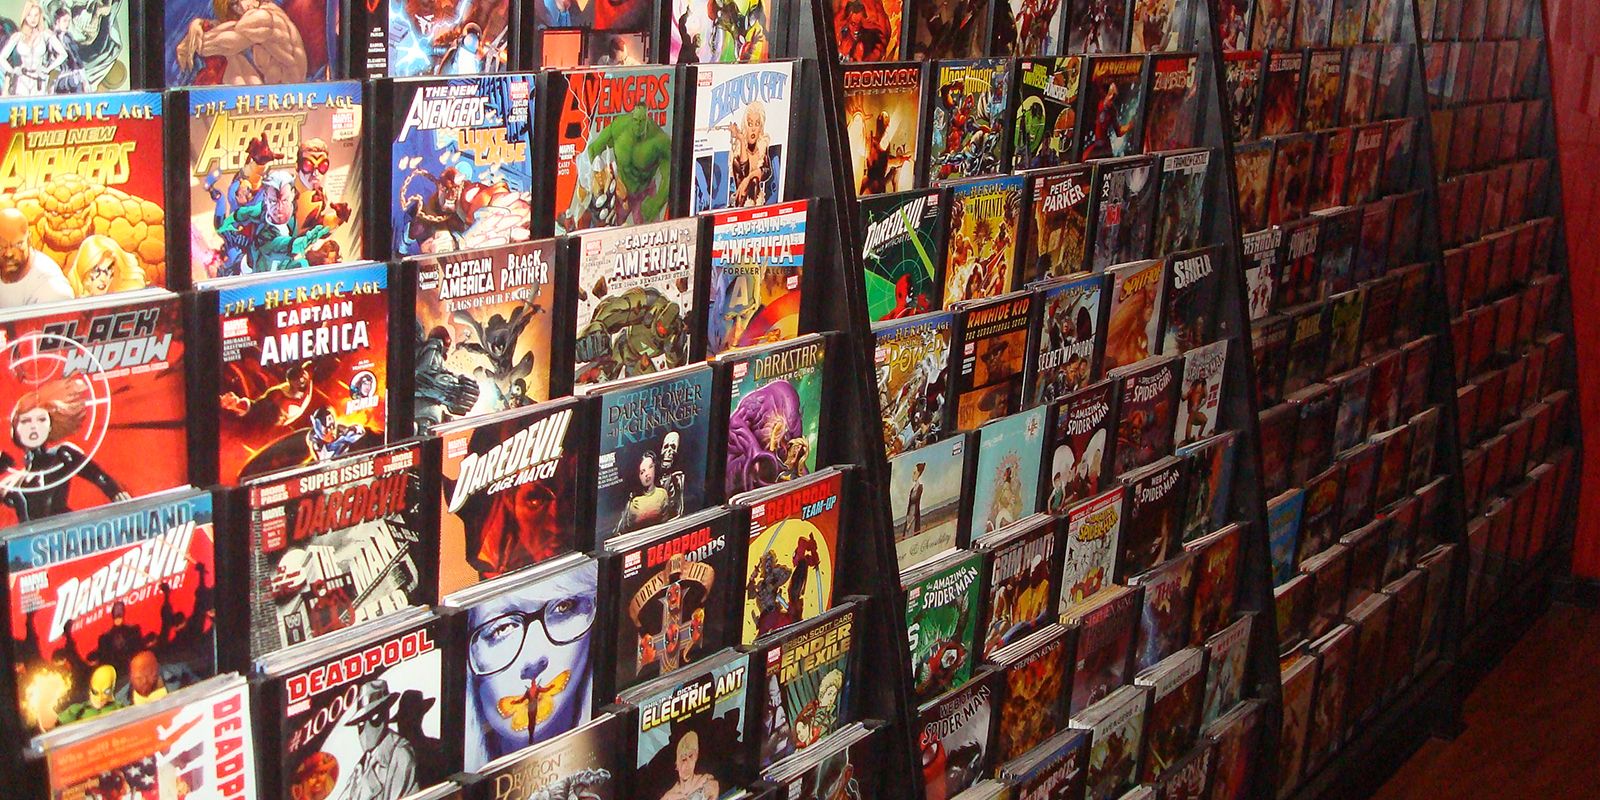 Comic books are a major industry with a rich history